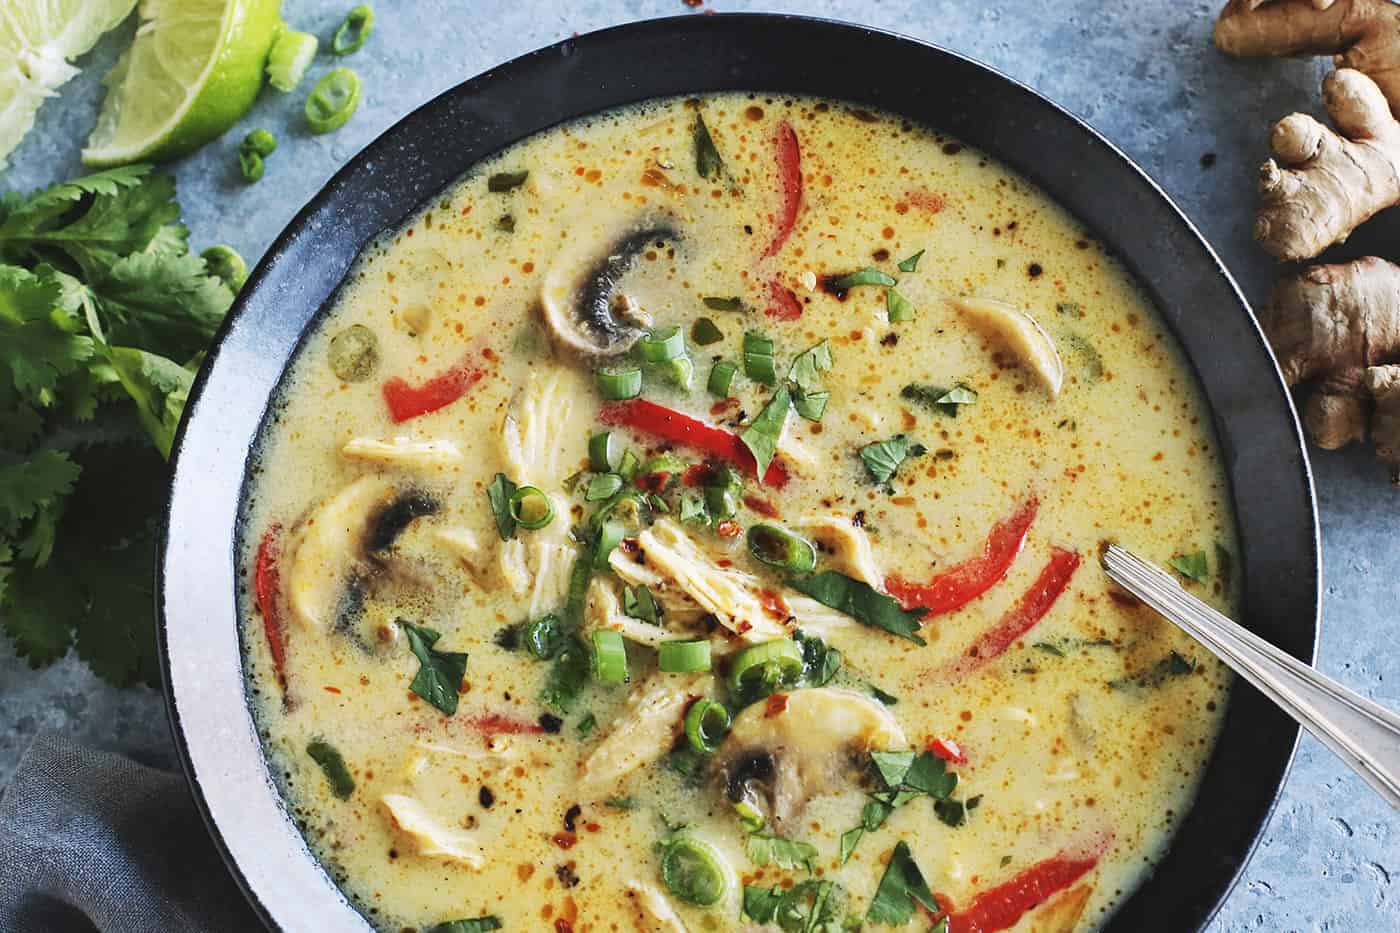 soup in a black bowl, consisting of coconut milk, curry, chicken, mushrooms, and red pepper